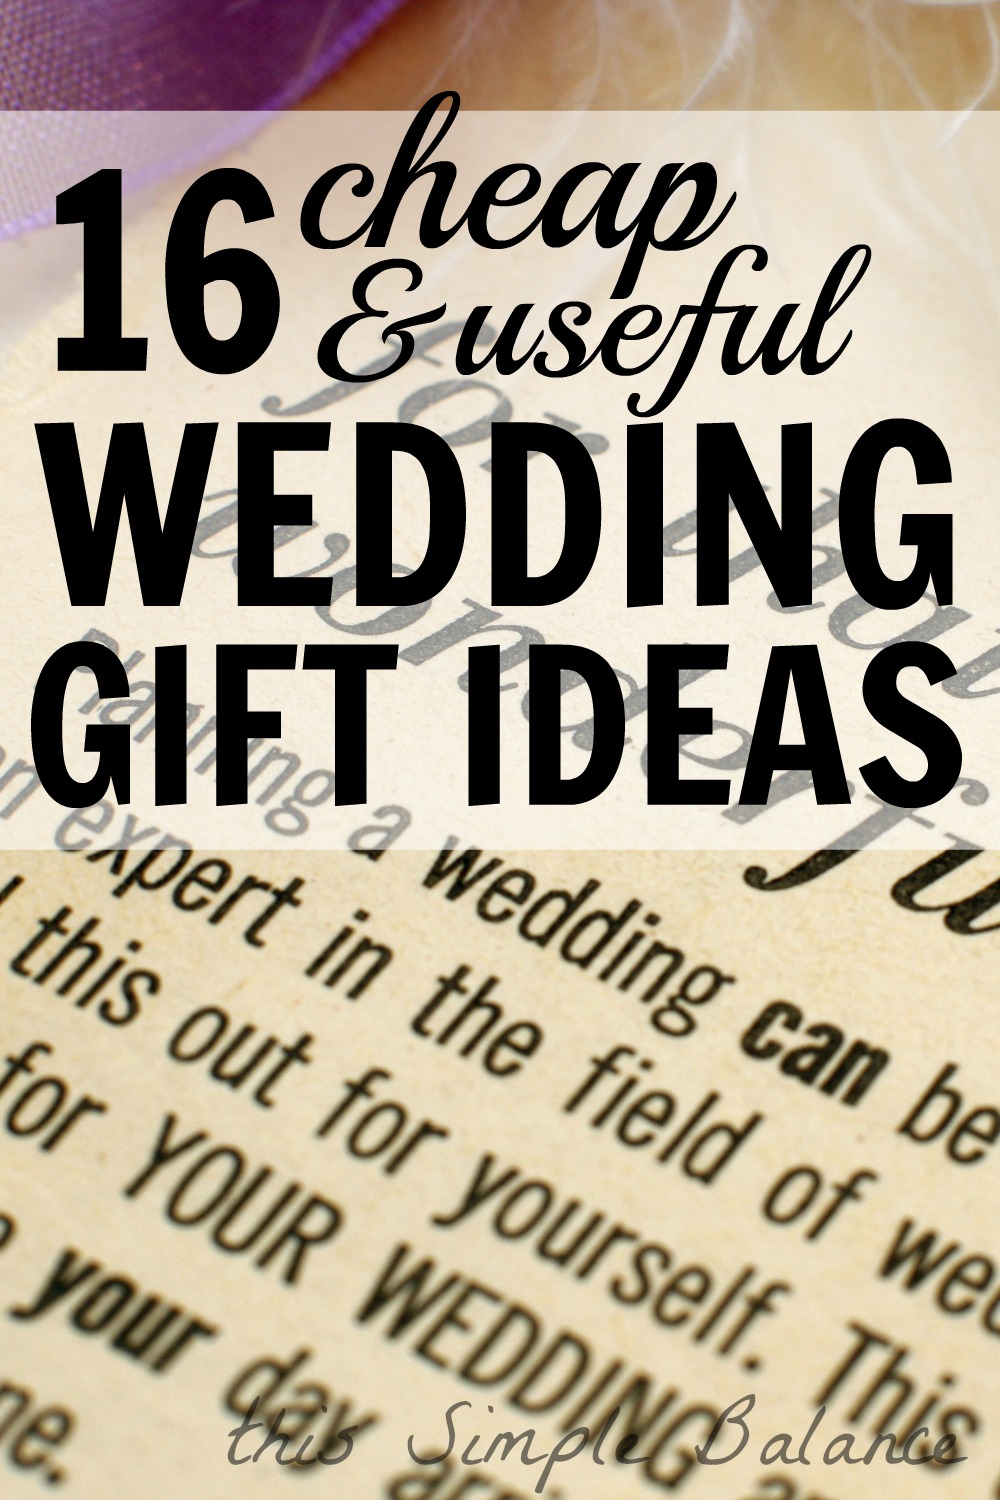 Cheap Useful Wedding Gifts: 16 Ideas for $20 or less! - This Simple Balance